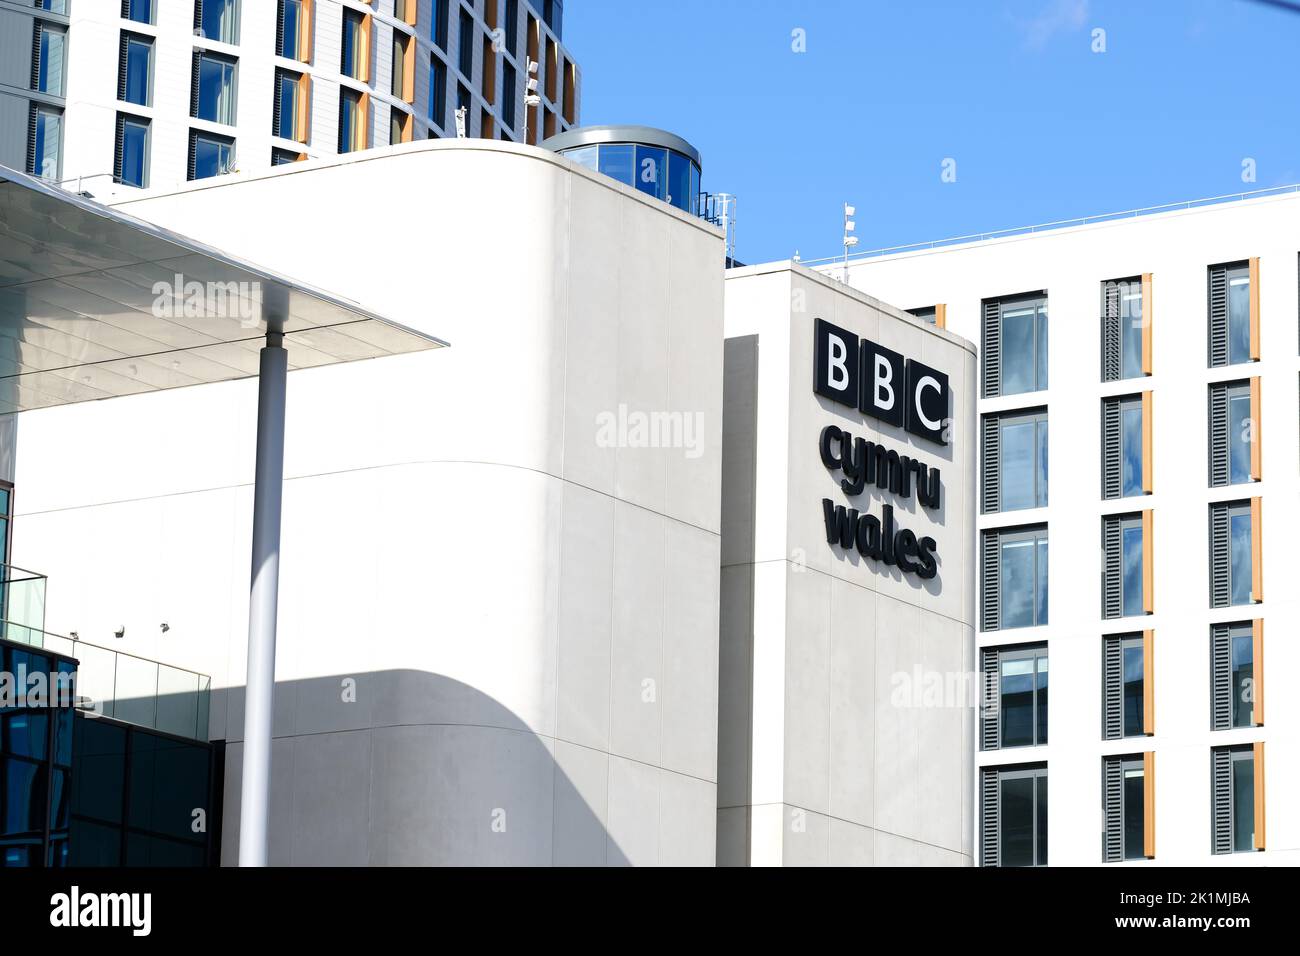 Cardiff Wales - The new BBC Cymru Wales broadcasting HQ ( radio and TV ) in central Cardiff seen in 2022 Stock Photo